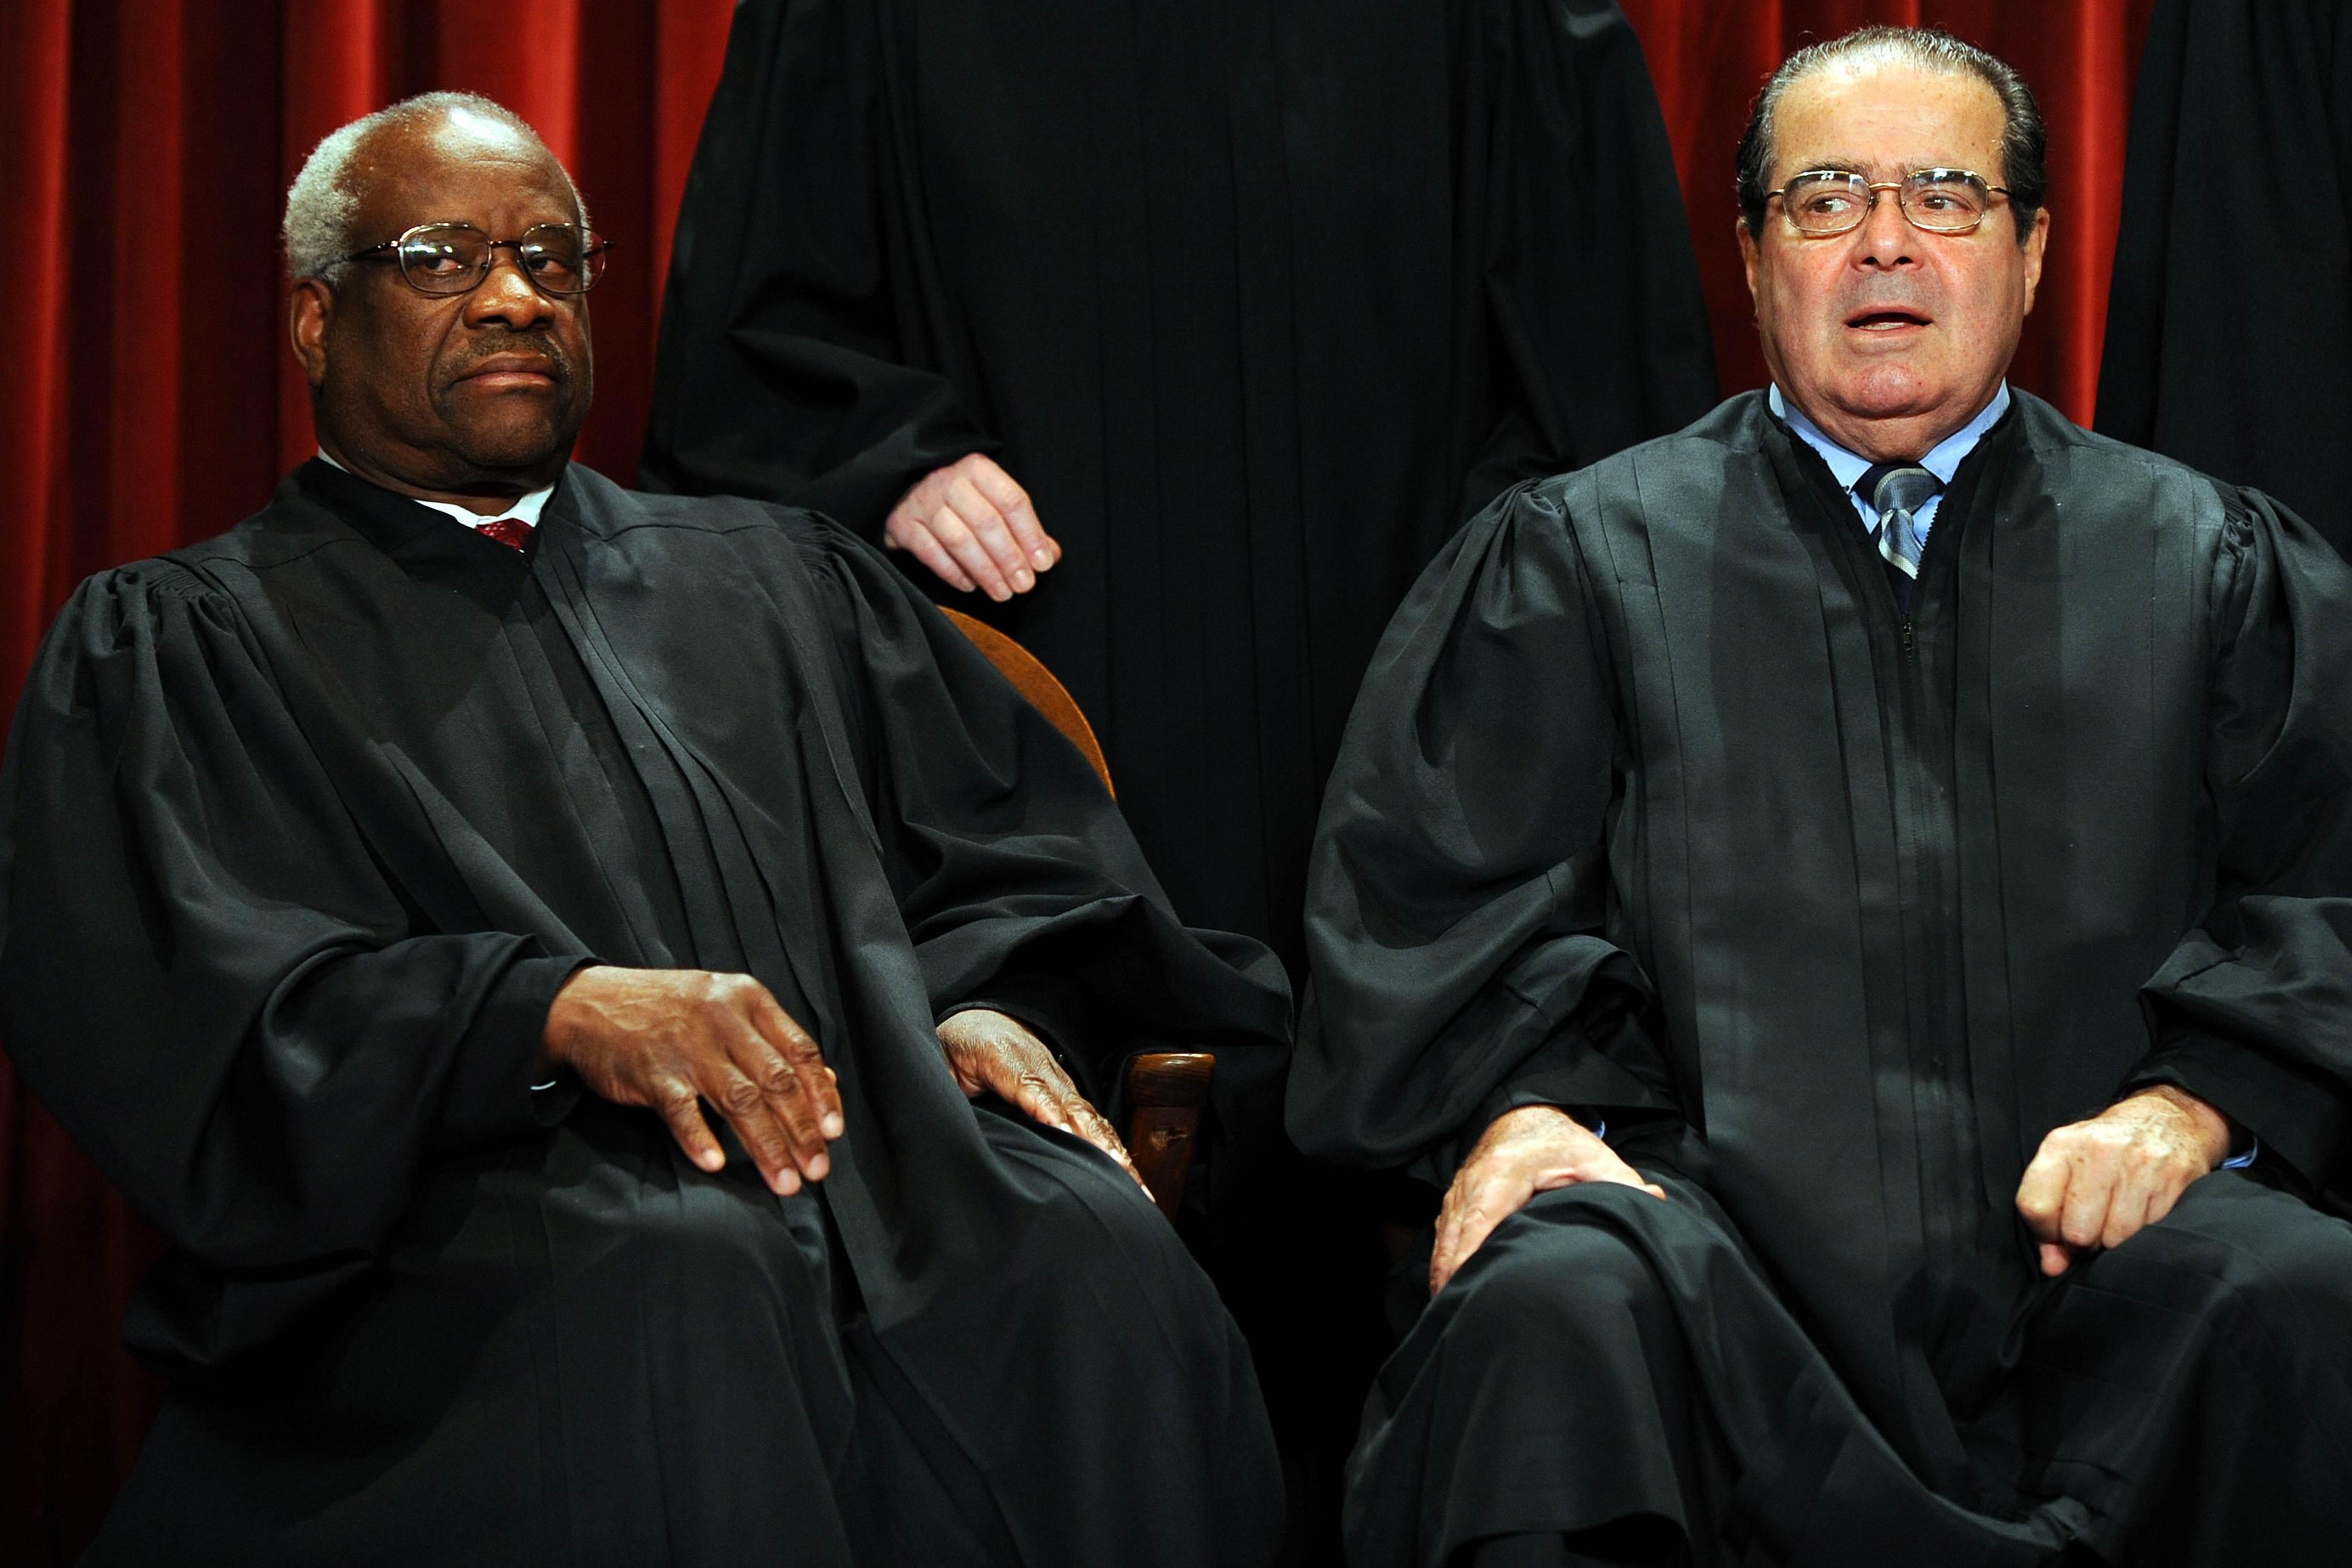 The justices seated in their robes, Thomas frowning and Scalia with his mouth agape.